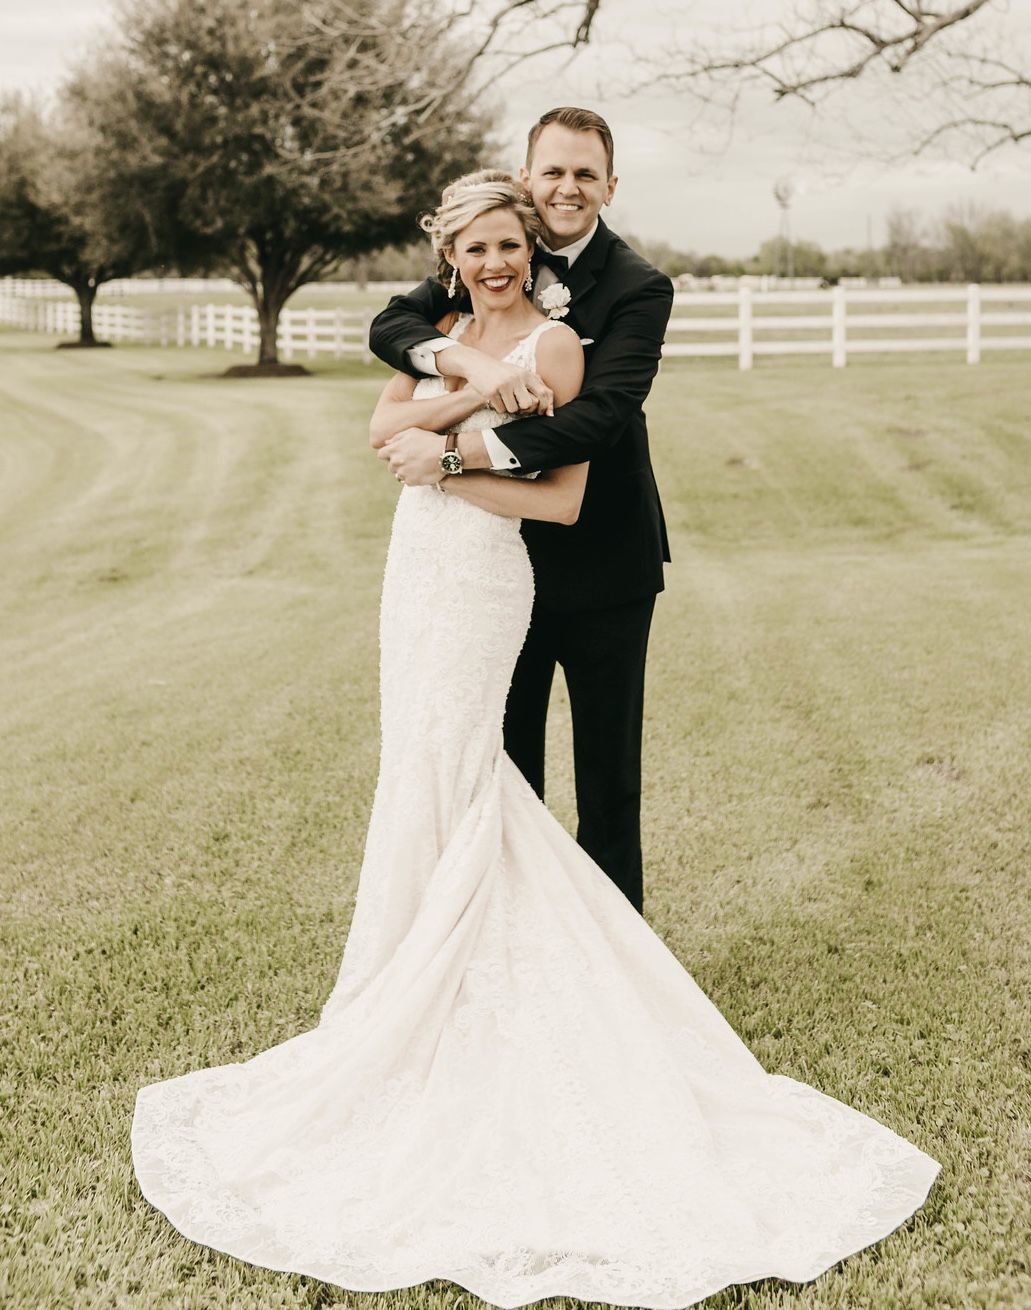 Kristen R. Dobson and Michael K. Hole exchanged wedding vows March 16 at Guardian Angel Catholic Church, Wallis, Texas.